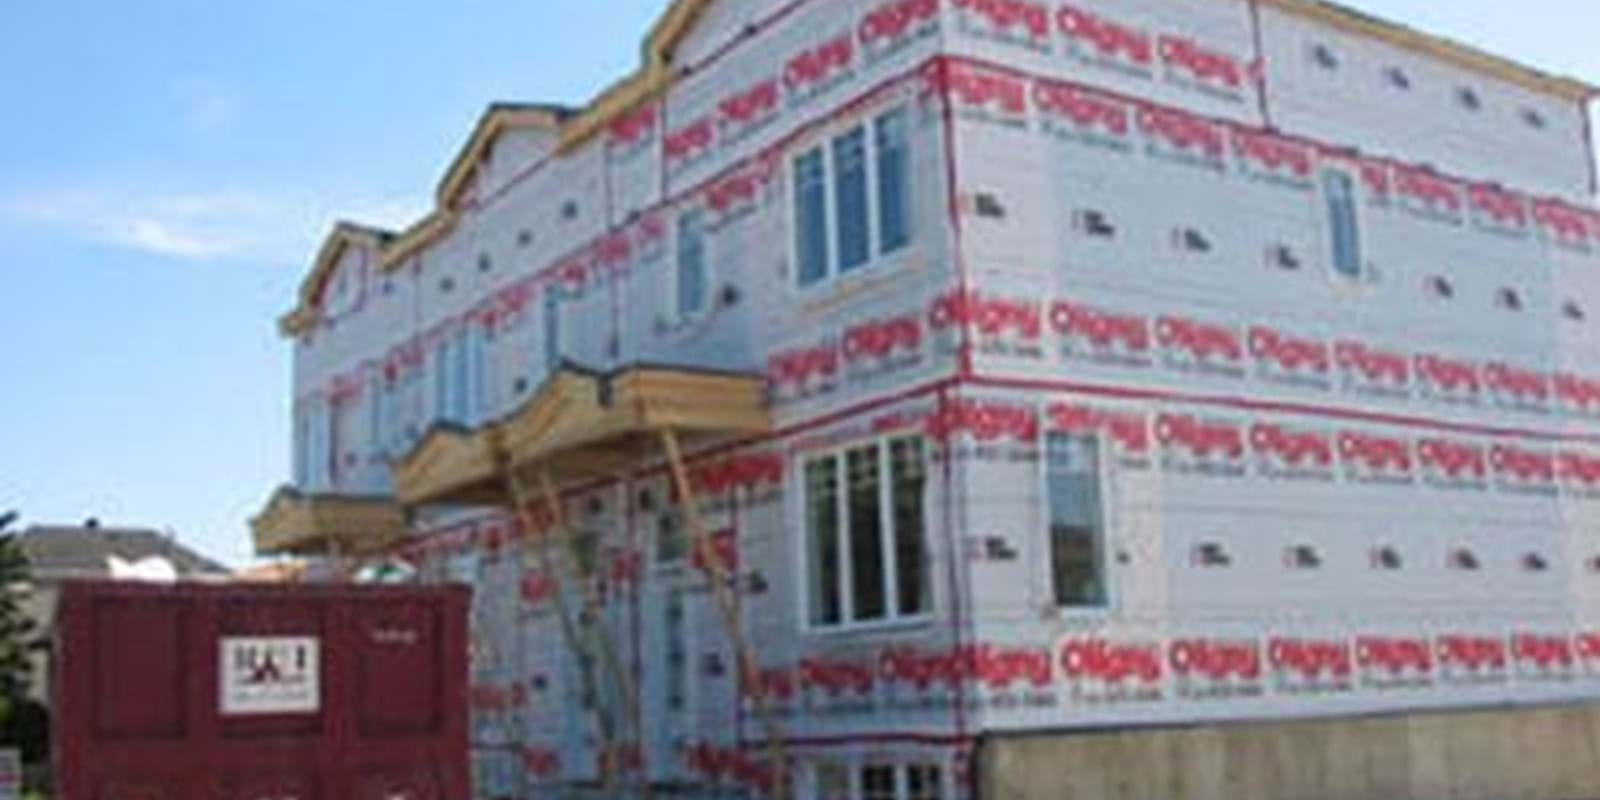 Municipalities issued $6.5 billion in building permits in September